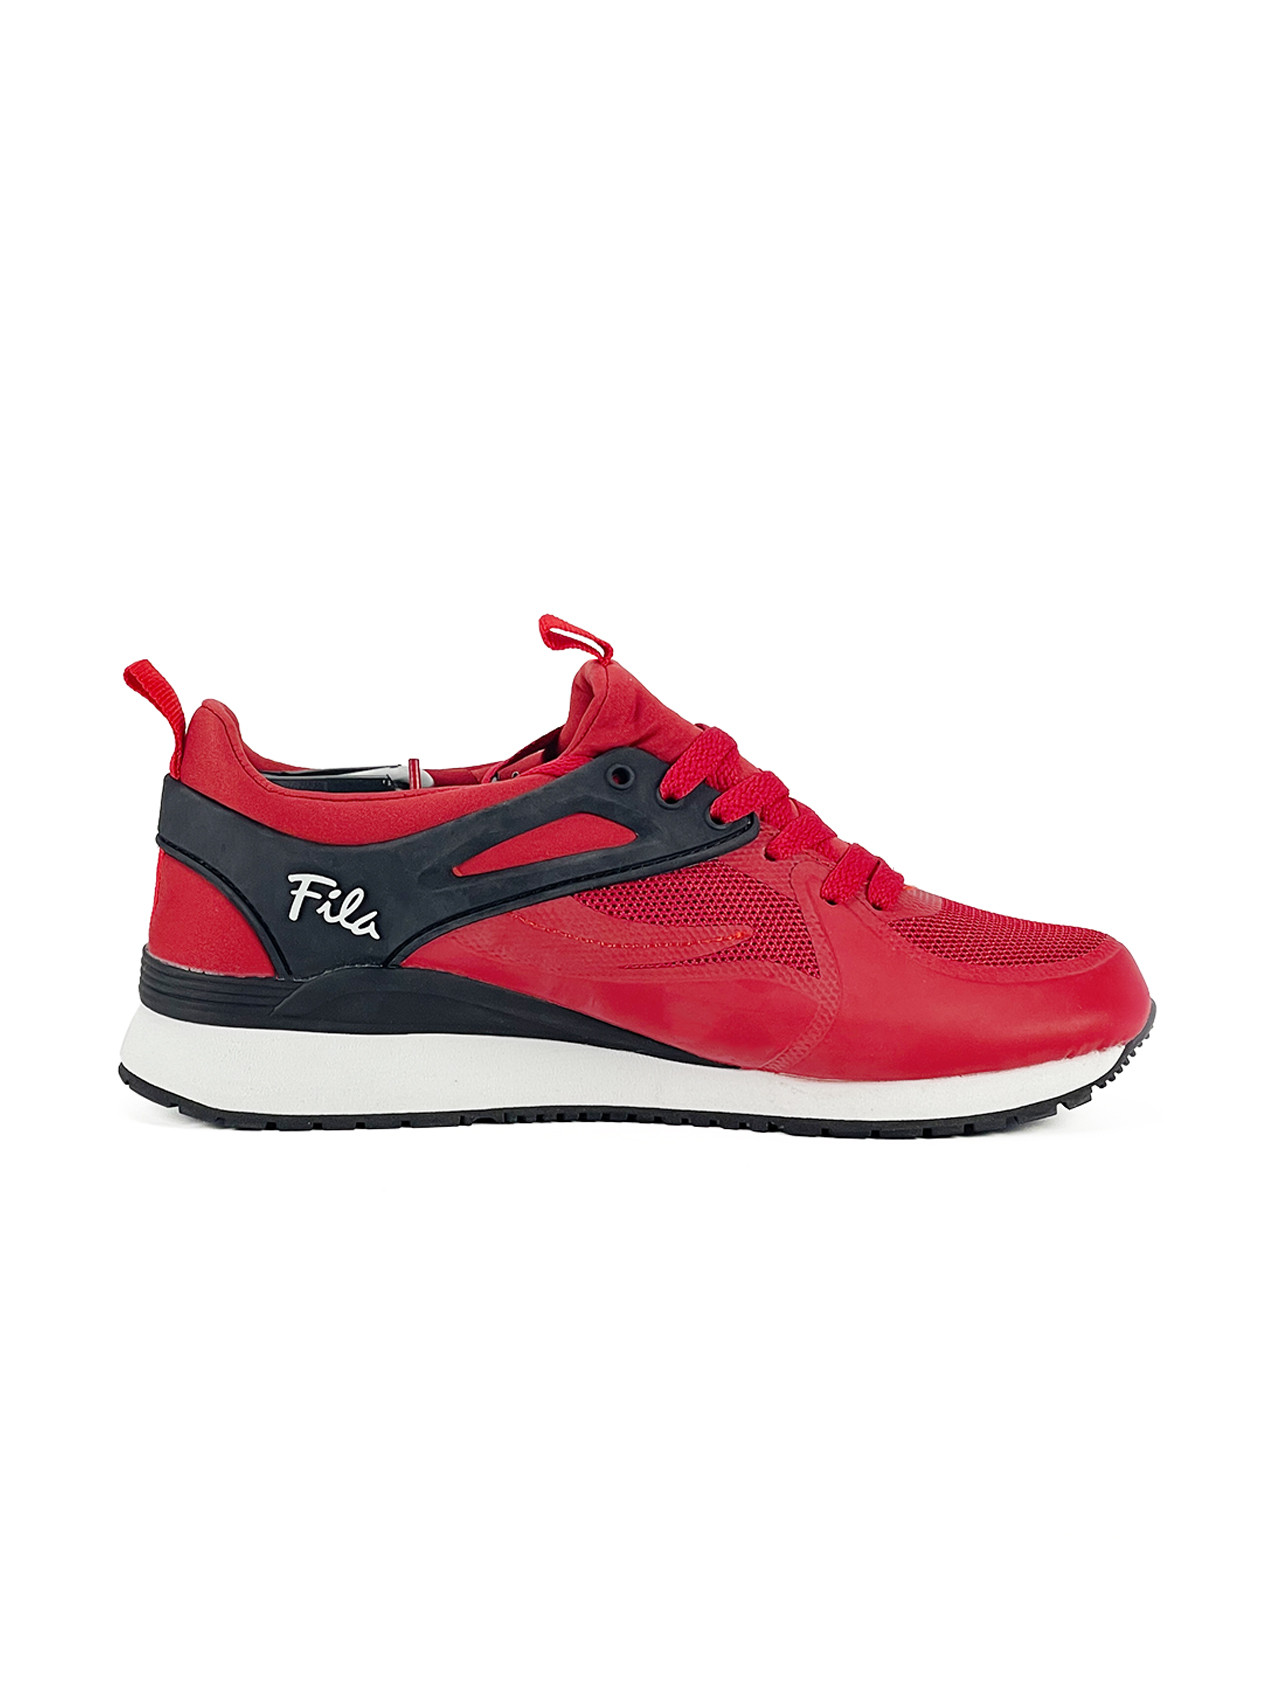 Espadrille homme Nadoulian, Rouge, 41